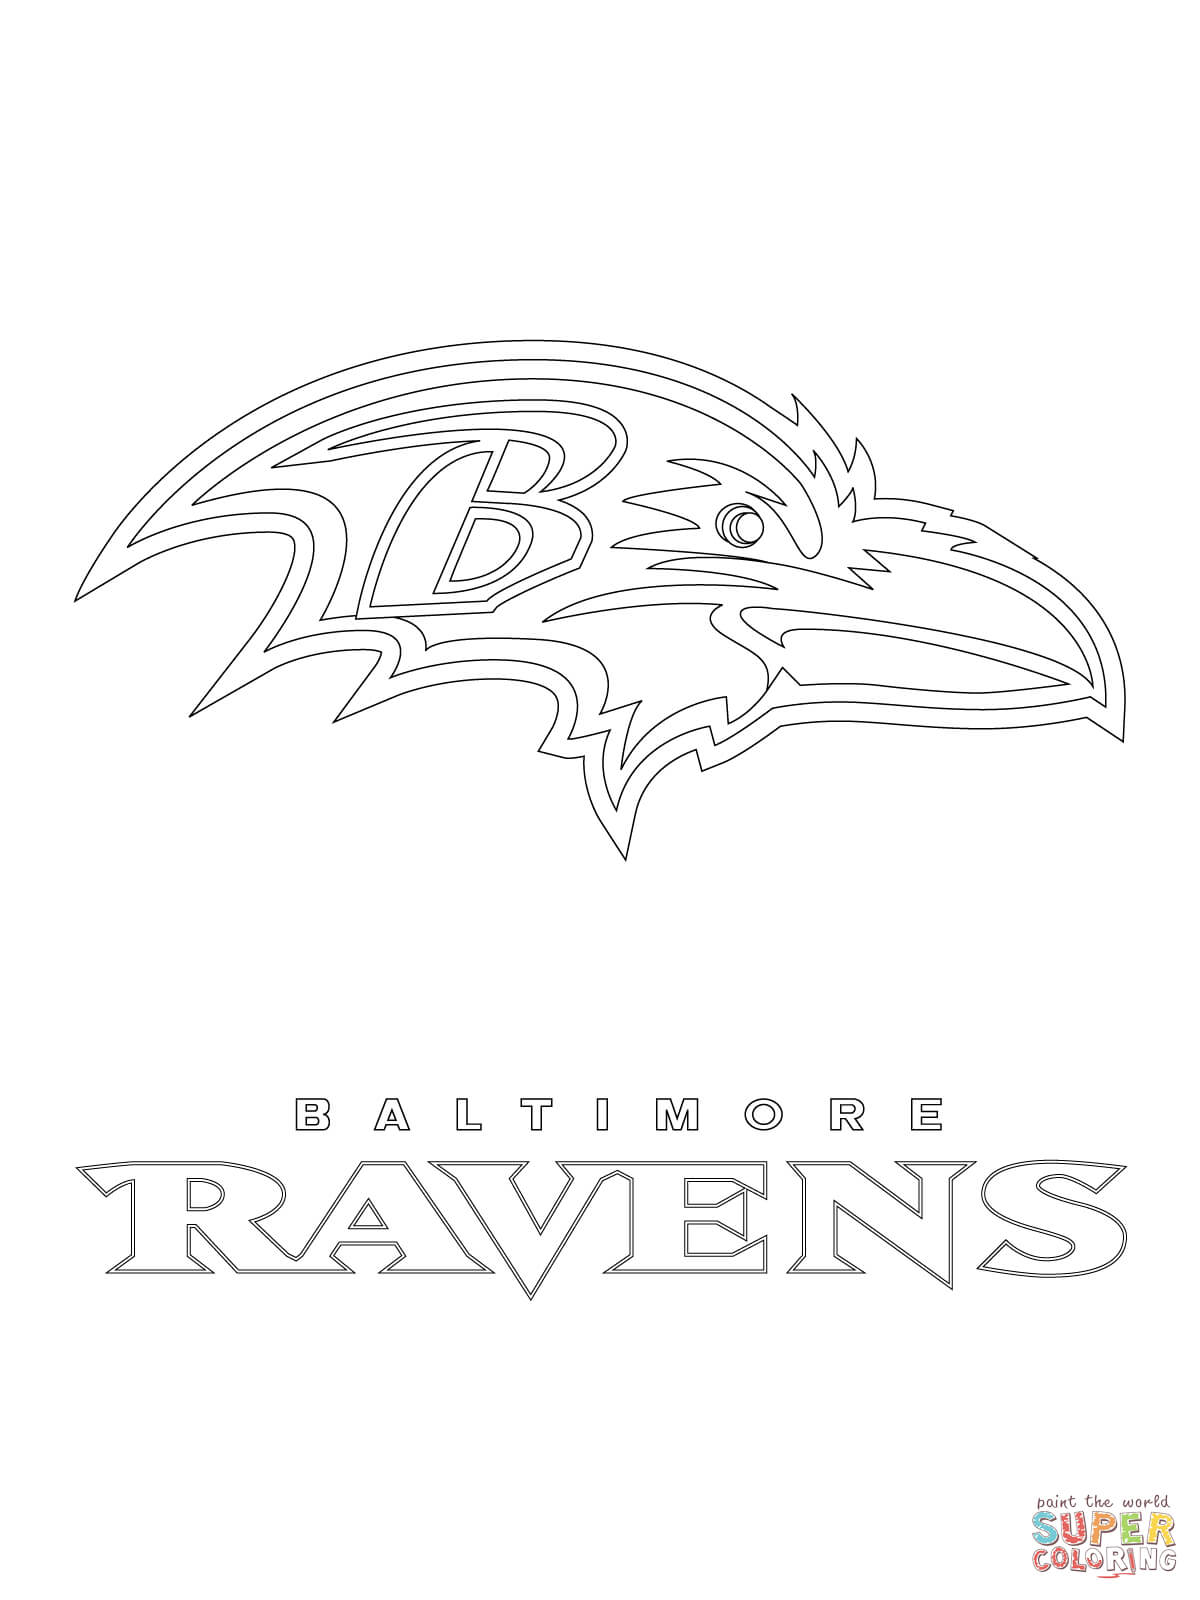 Baltimore Ravens Logo coloring page | Free Printable Coloring Pages